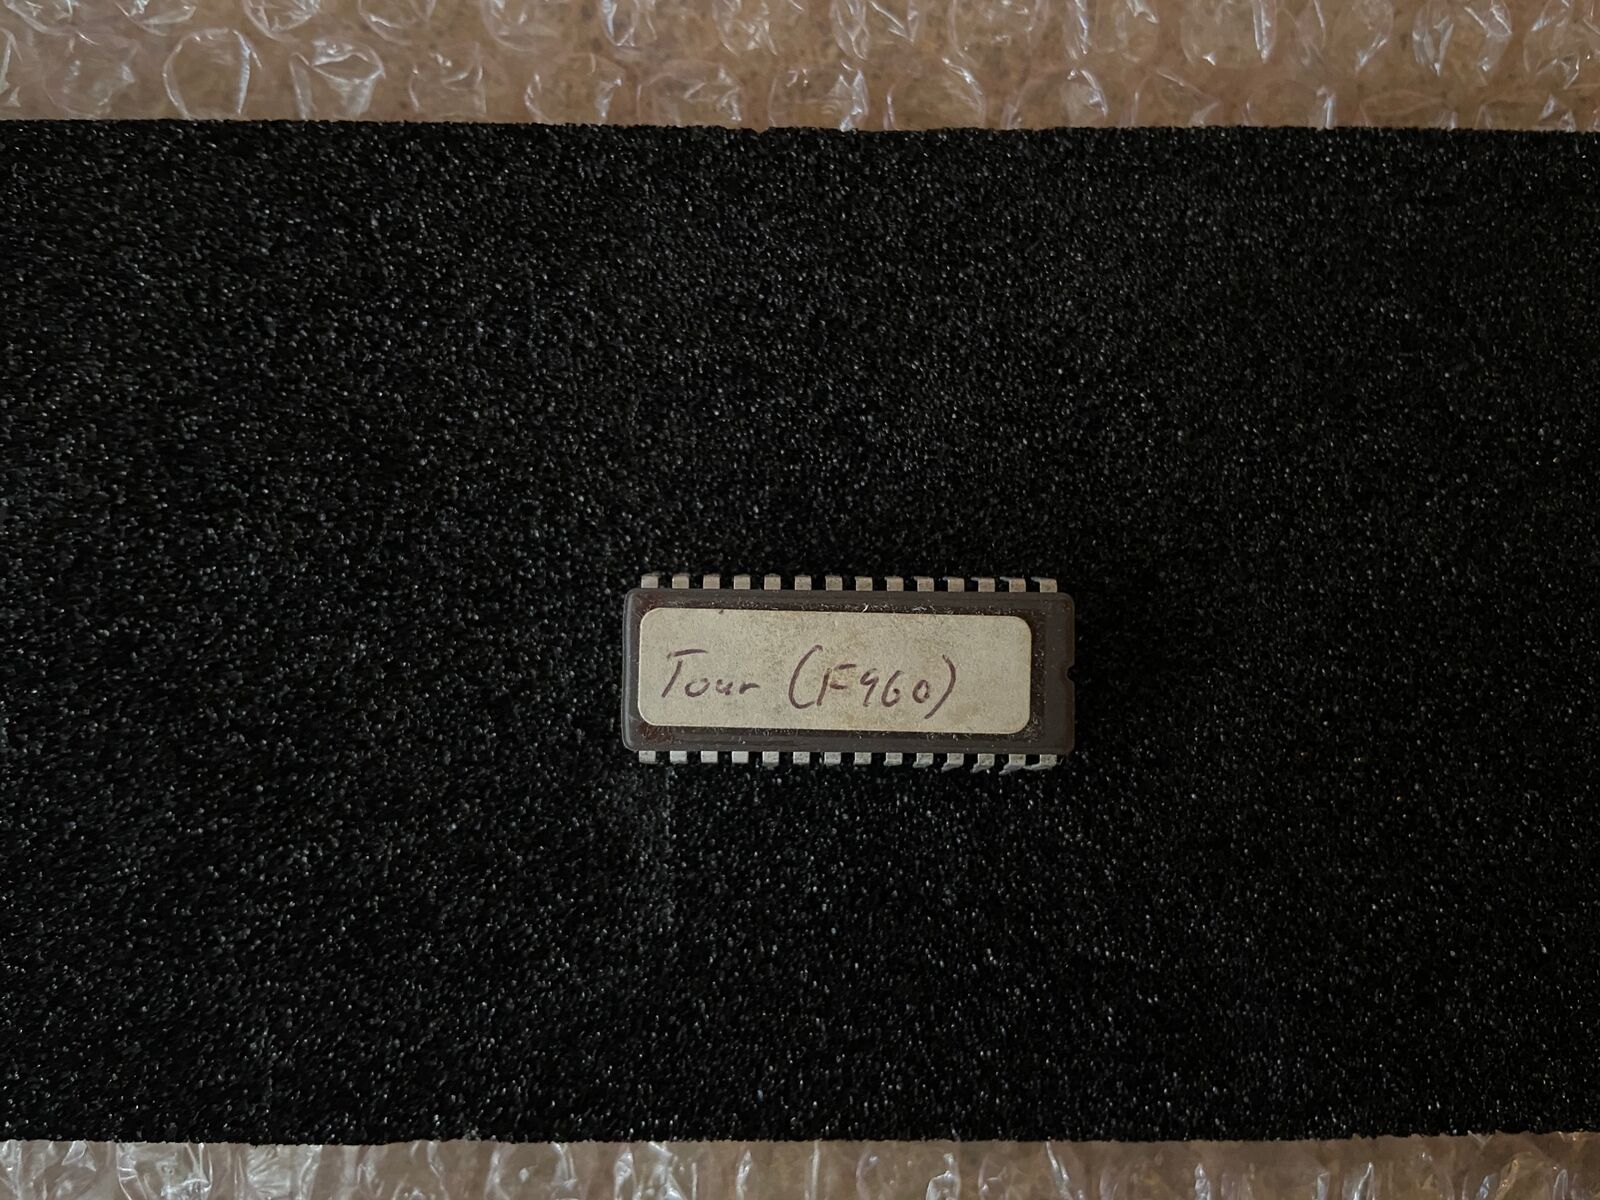 GENUINE IGT TOUR (F960) EPROM *FAST SHIPPING* / (34)